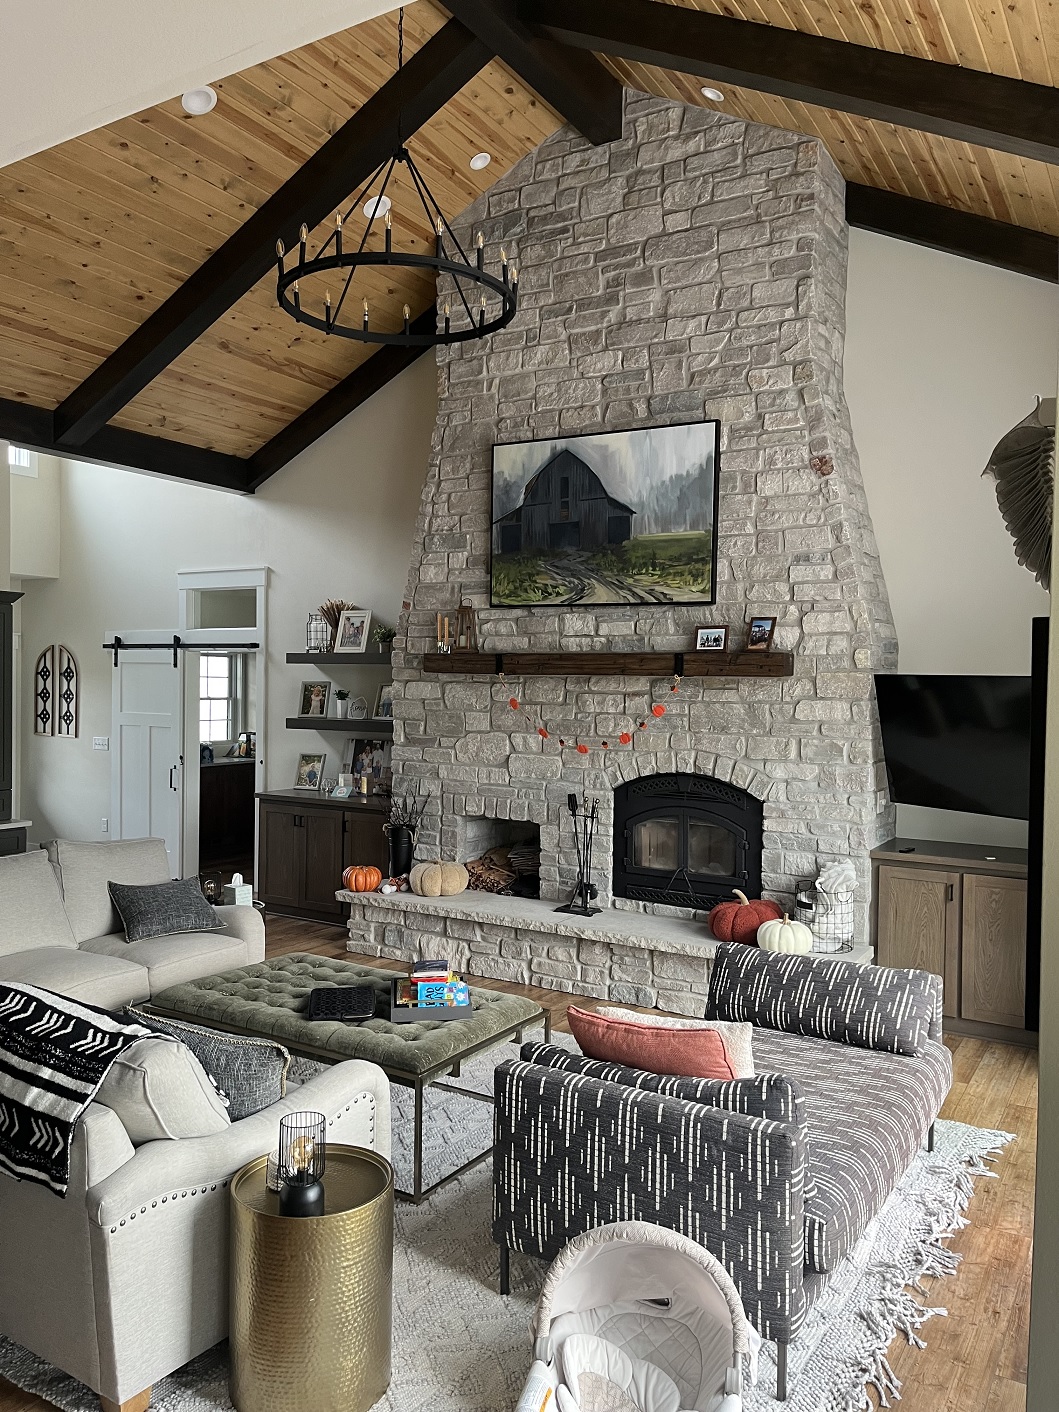 Interior image of fireplace in Kriege custom home.  Floor to ceiling rustic fireplace  built of stone with large wood mantel.